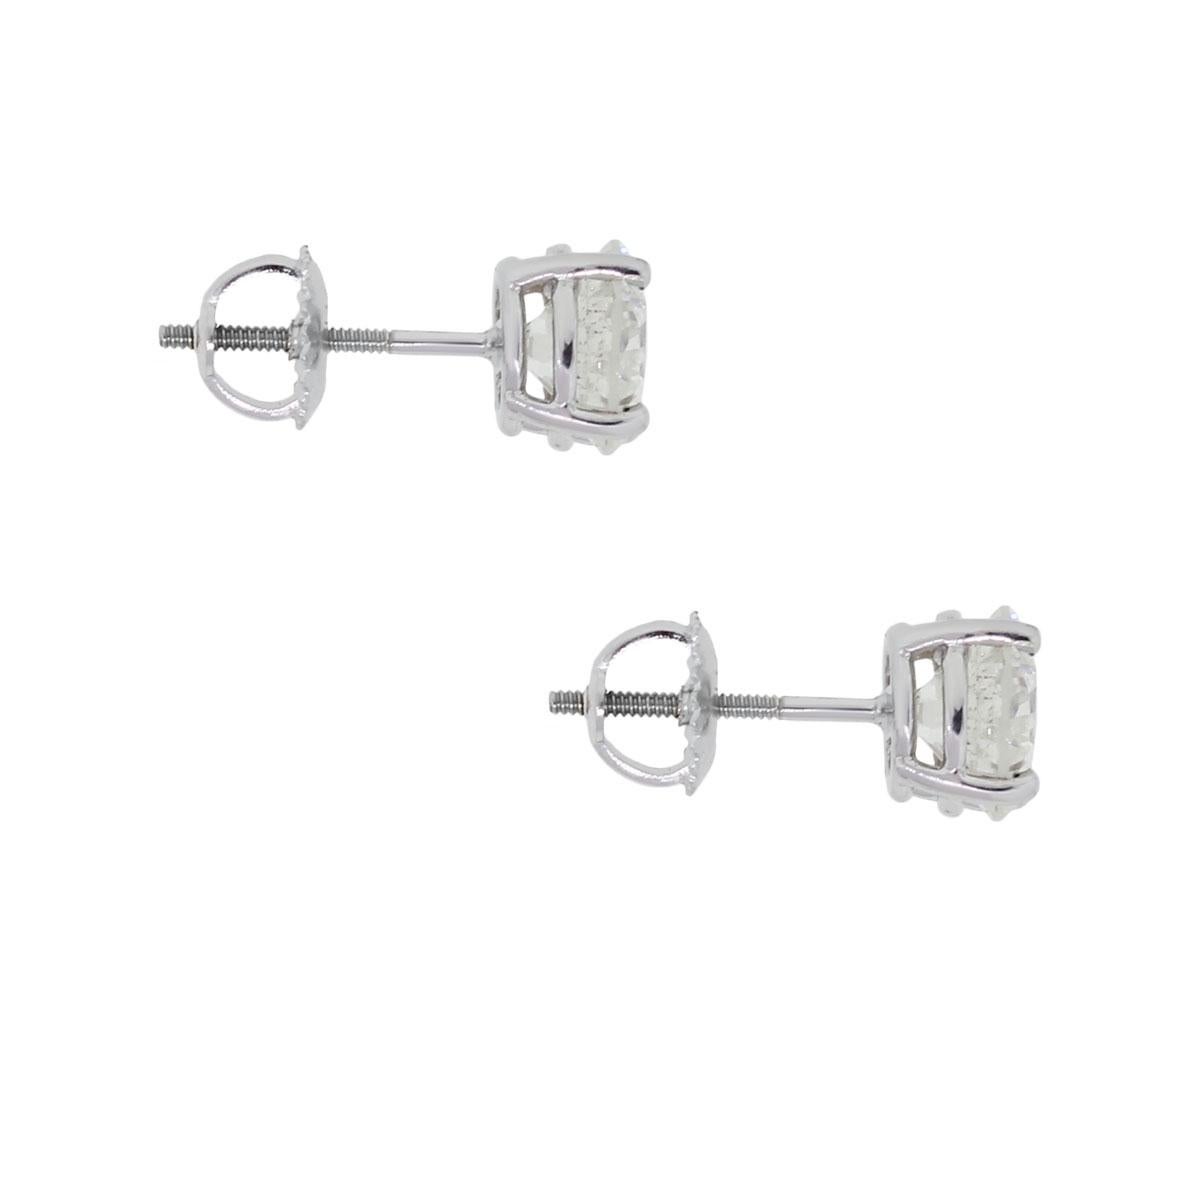 Material: 14k white gold
Diamond Details: Approximately 2.86ctw of round brilliant diamonds. Diamonds are I/J in color and SI3 in clarity
Measurements: 0.63″ x 0.27″ x 0.27″
Earring Backs: Threaded
Total Weight: 2g (1.3dwt)
Additional Details: This